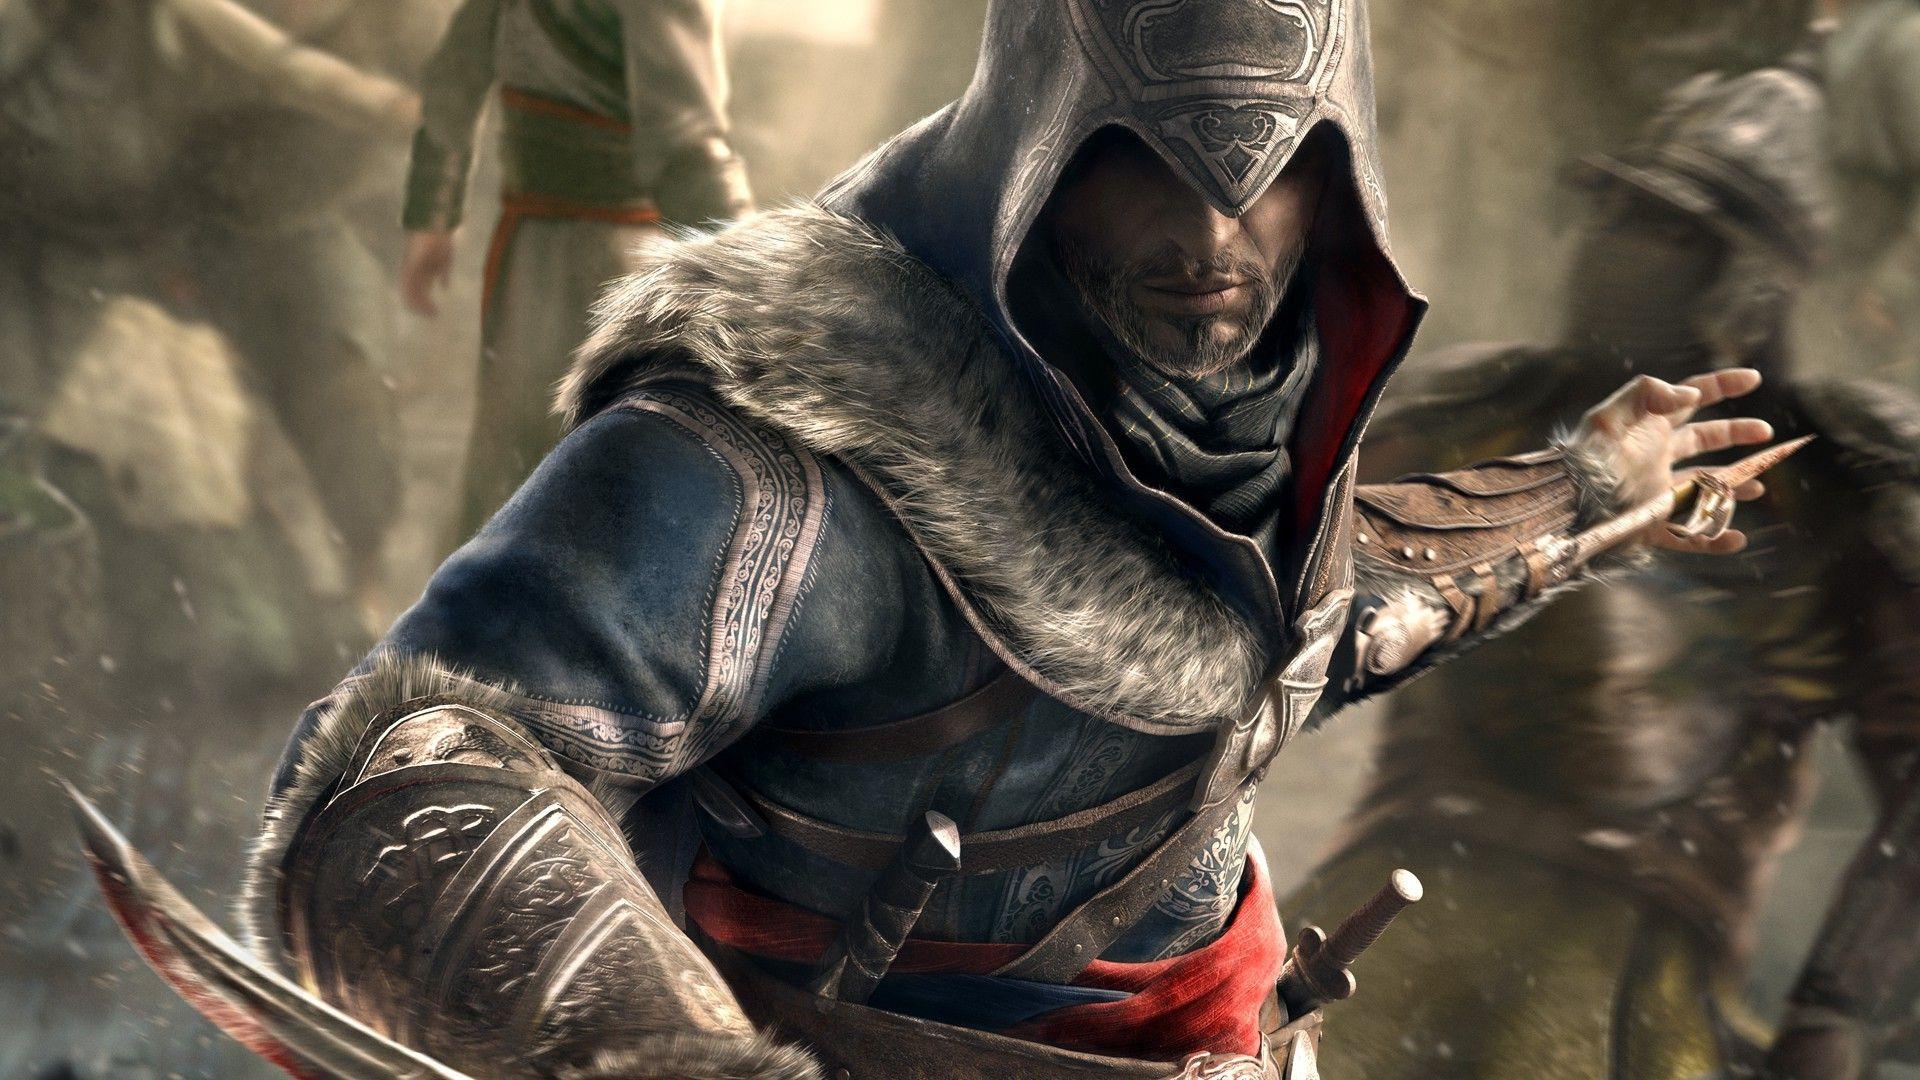 Assassins Creed: Revelations, Ezio Auditore Da Firenze, Video Game Characters Wallpaper HD / Desktop and Mobile Background